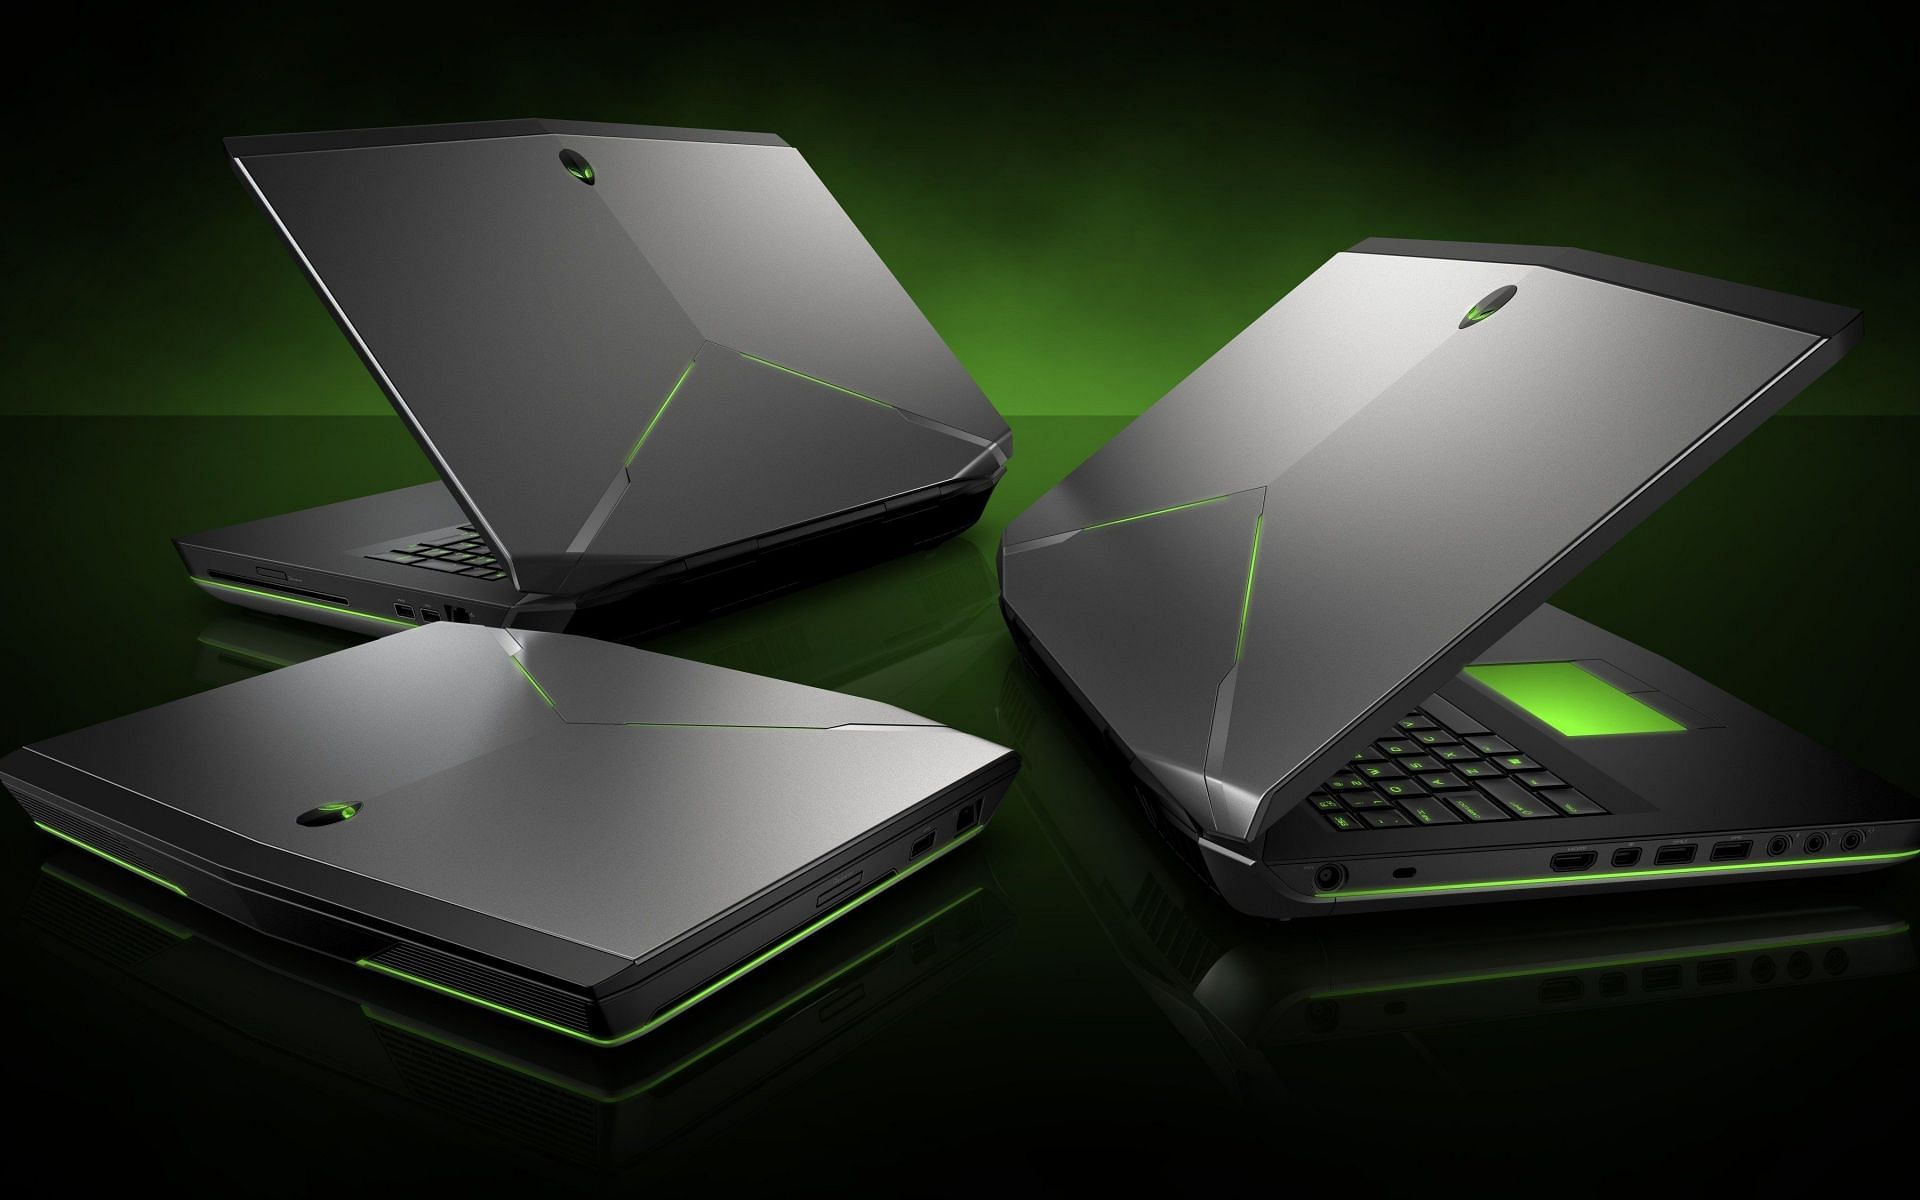 Alienware series of gaming laptops (Image via Dell)